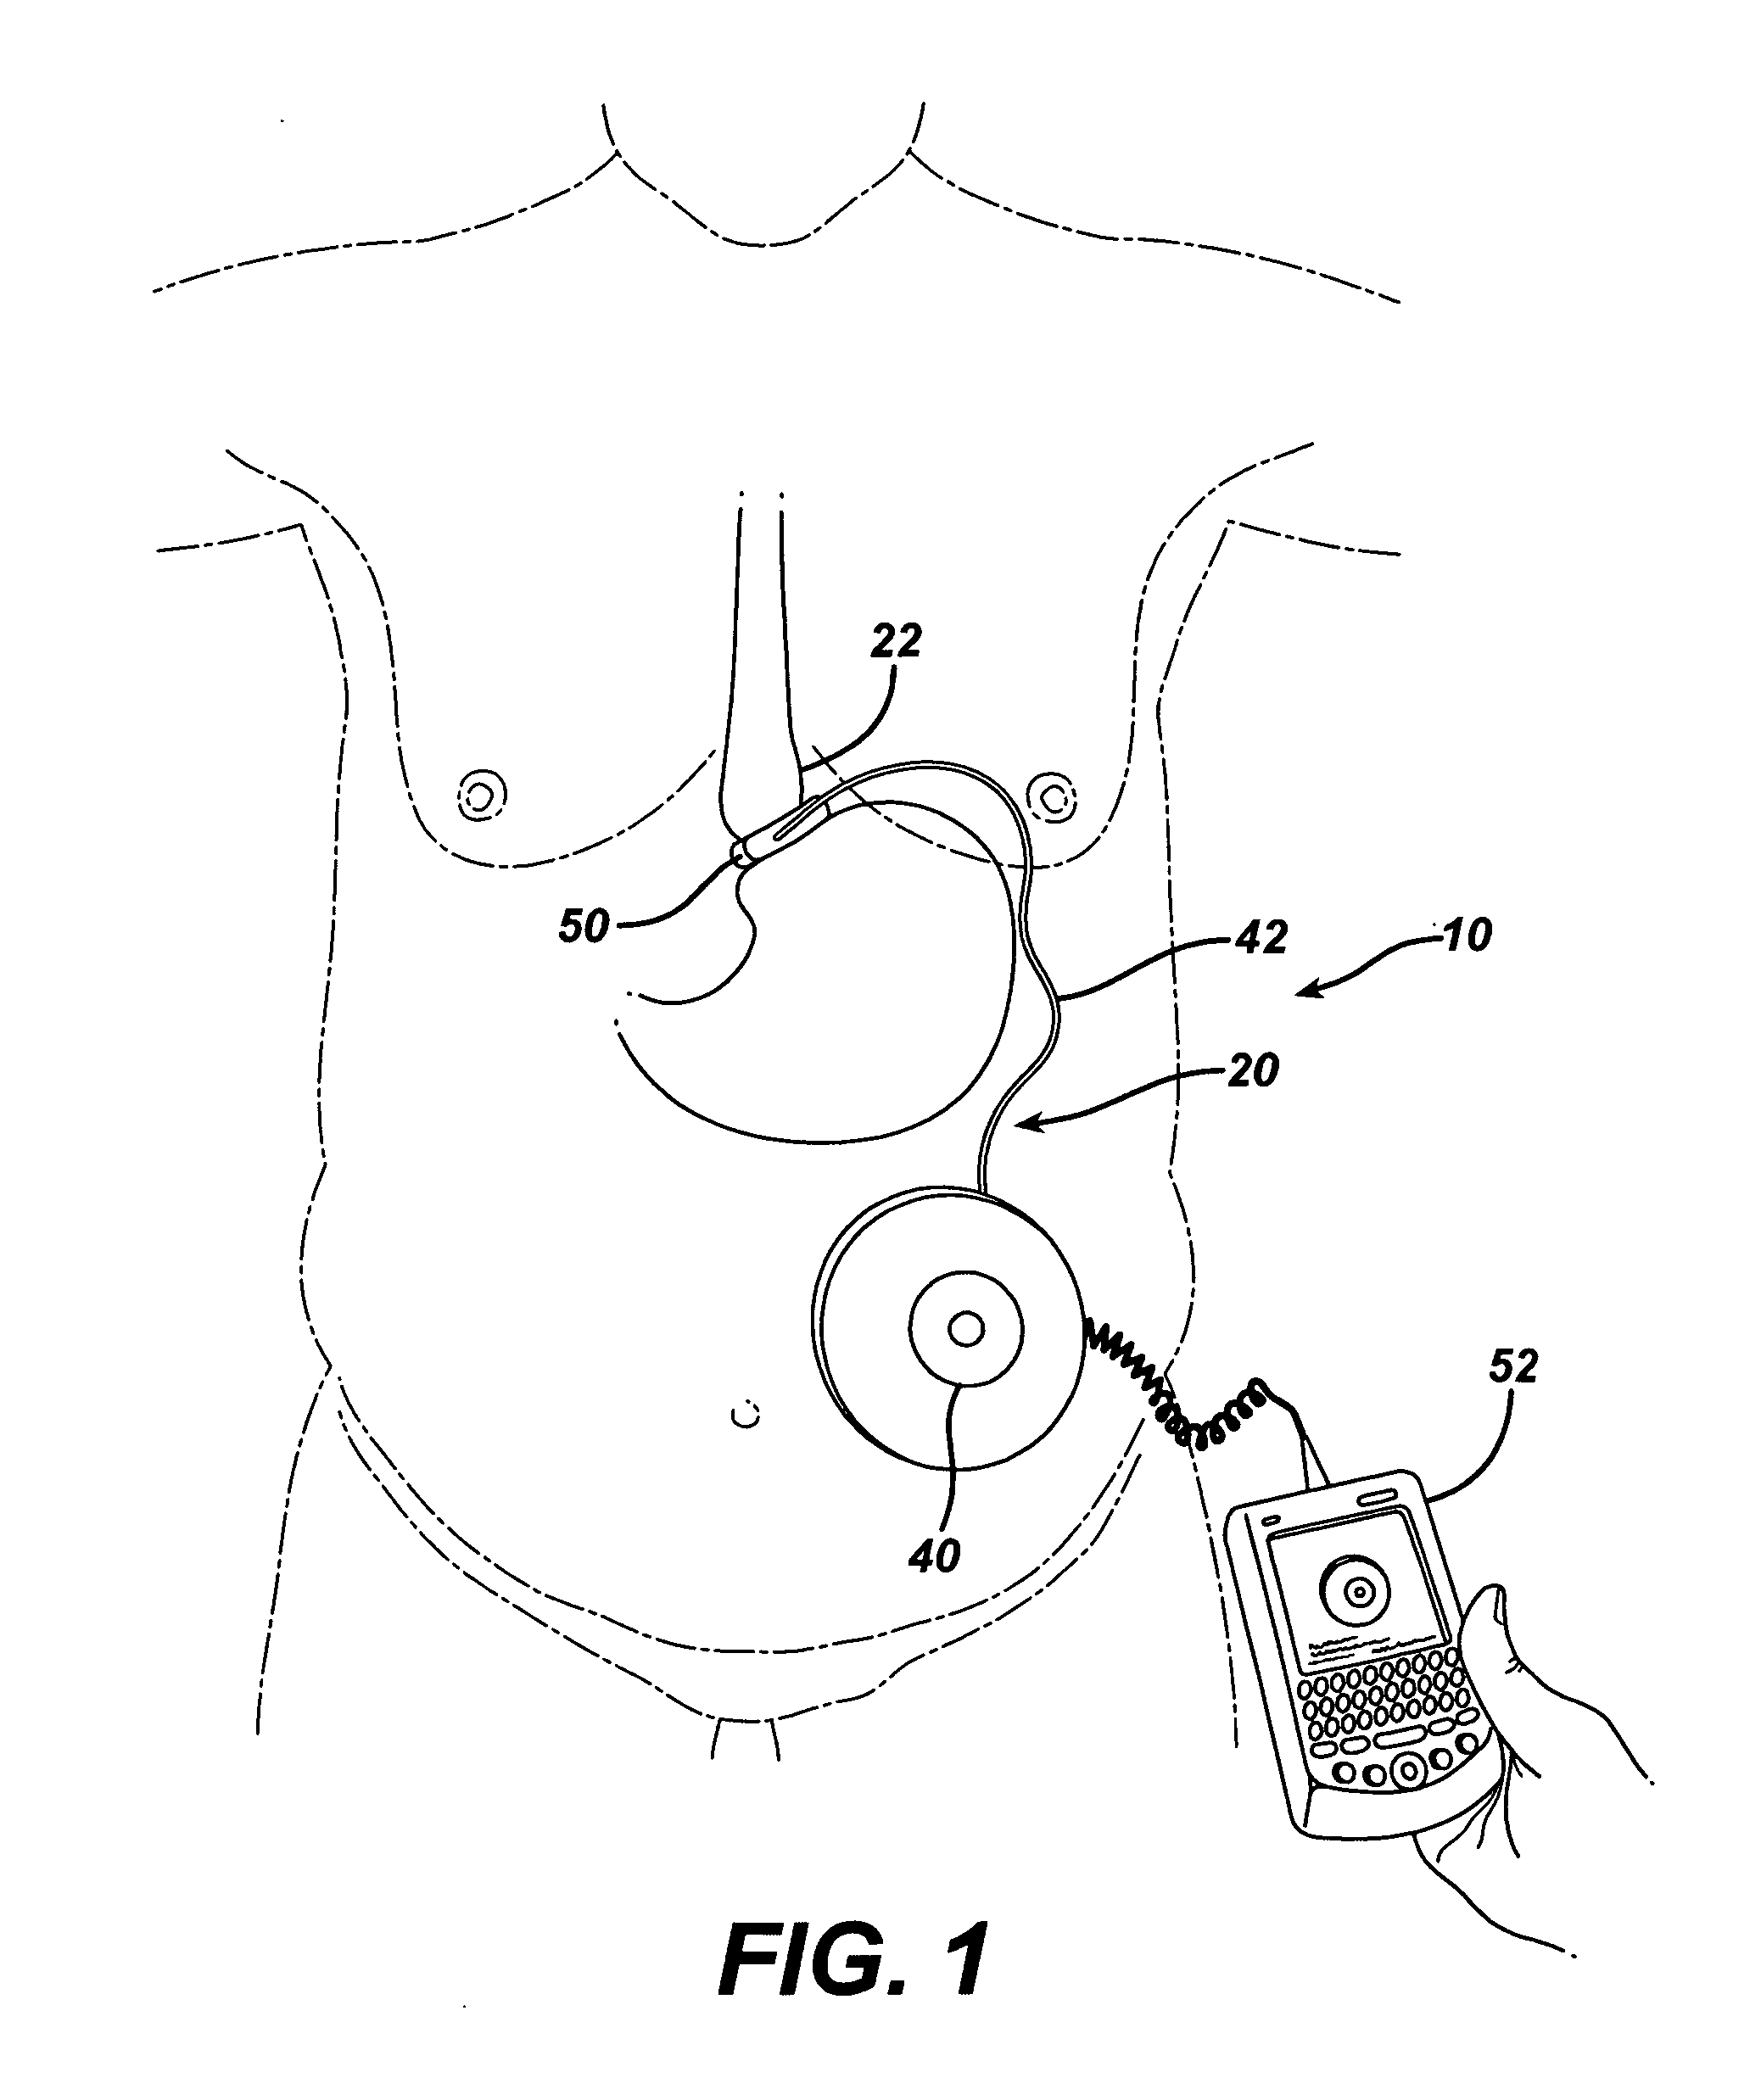 Thermodynamically driven reversible infuser pump for use as a remotely controlled gastric band